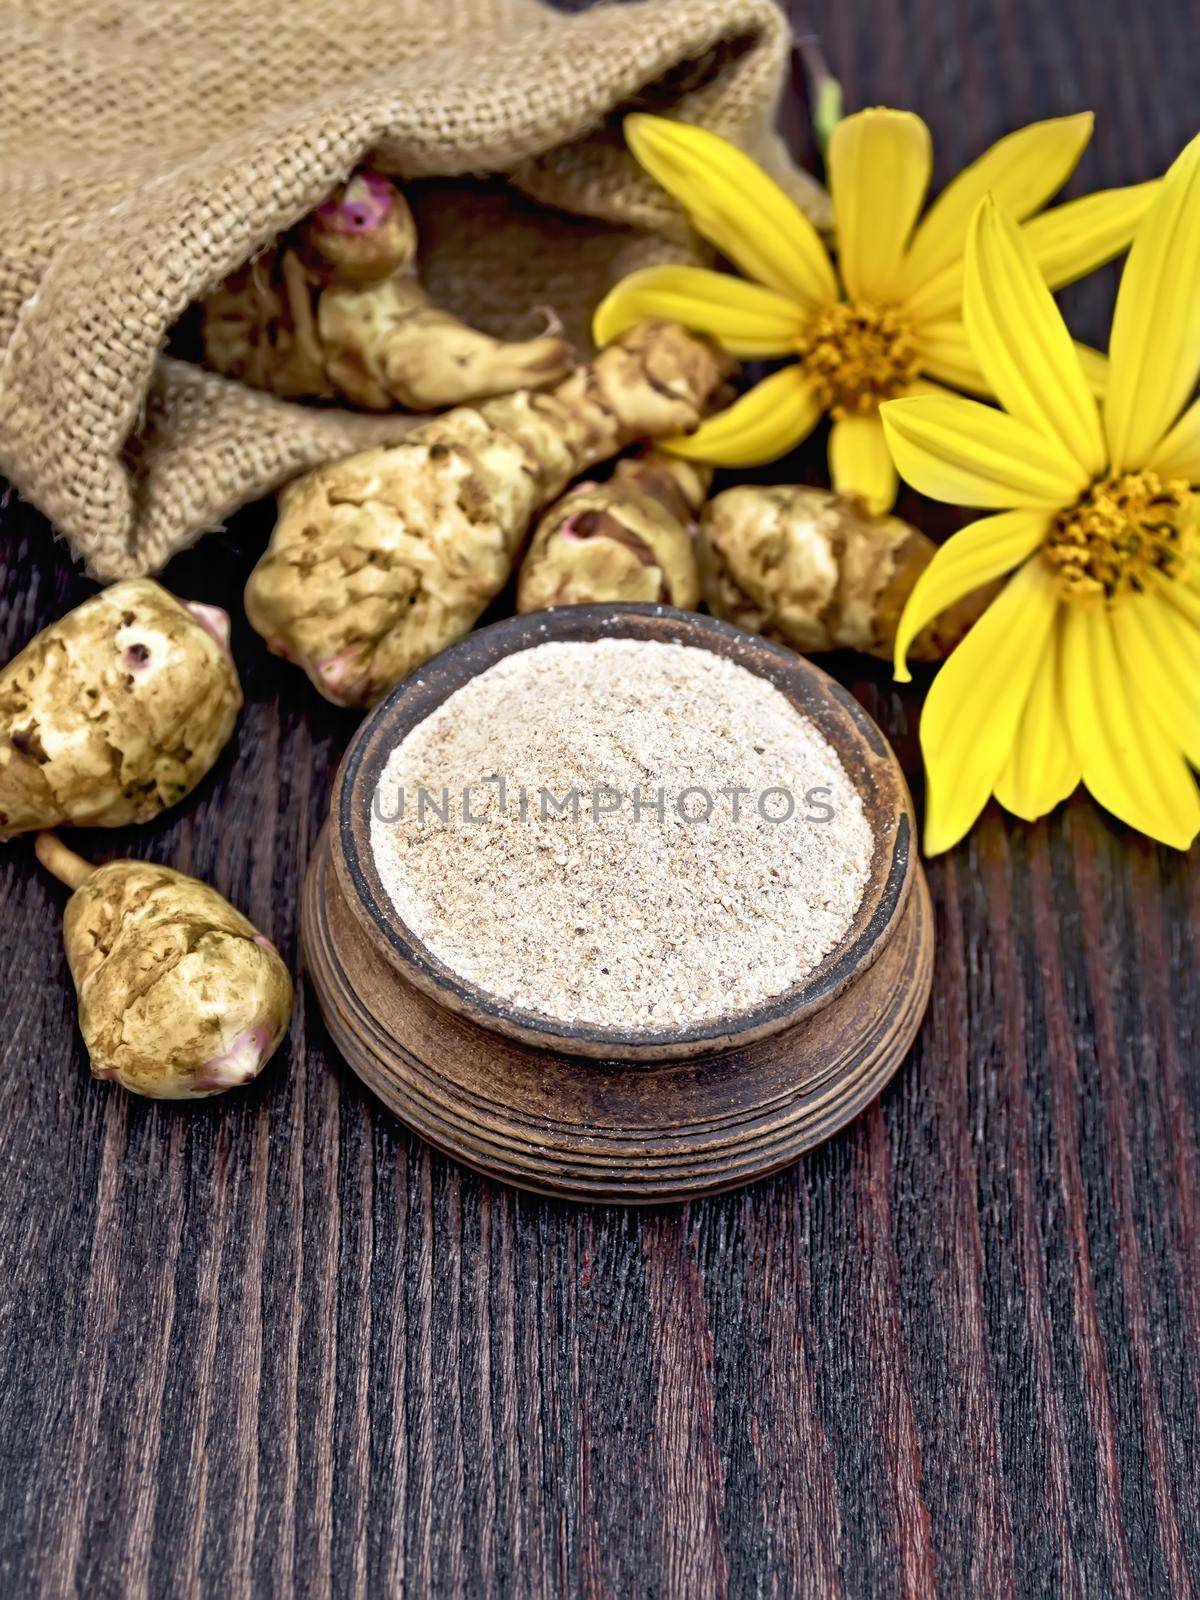 Flour of Jerusalem artichoke in a clay bowl with a flower and vegetables on a dark wooden board